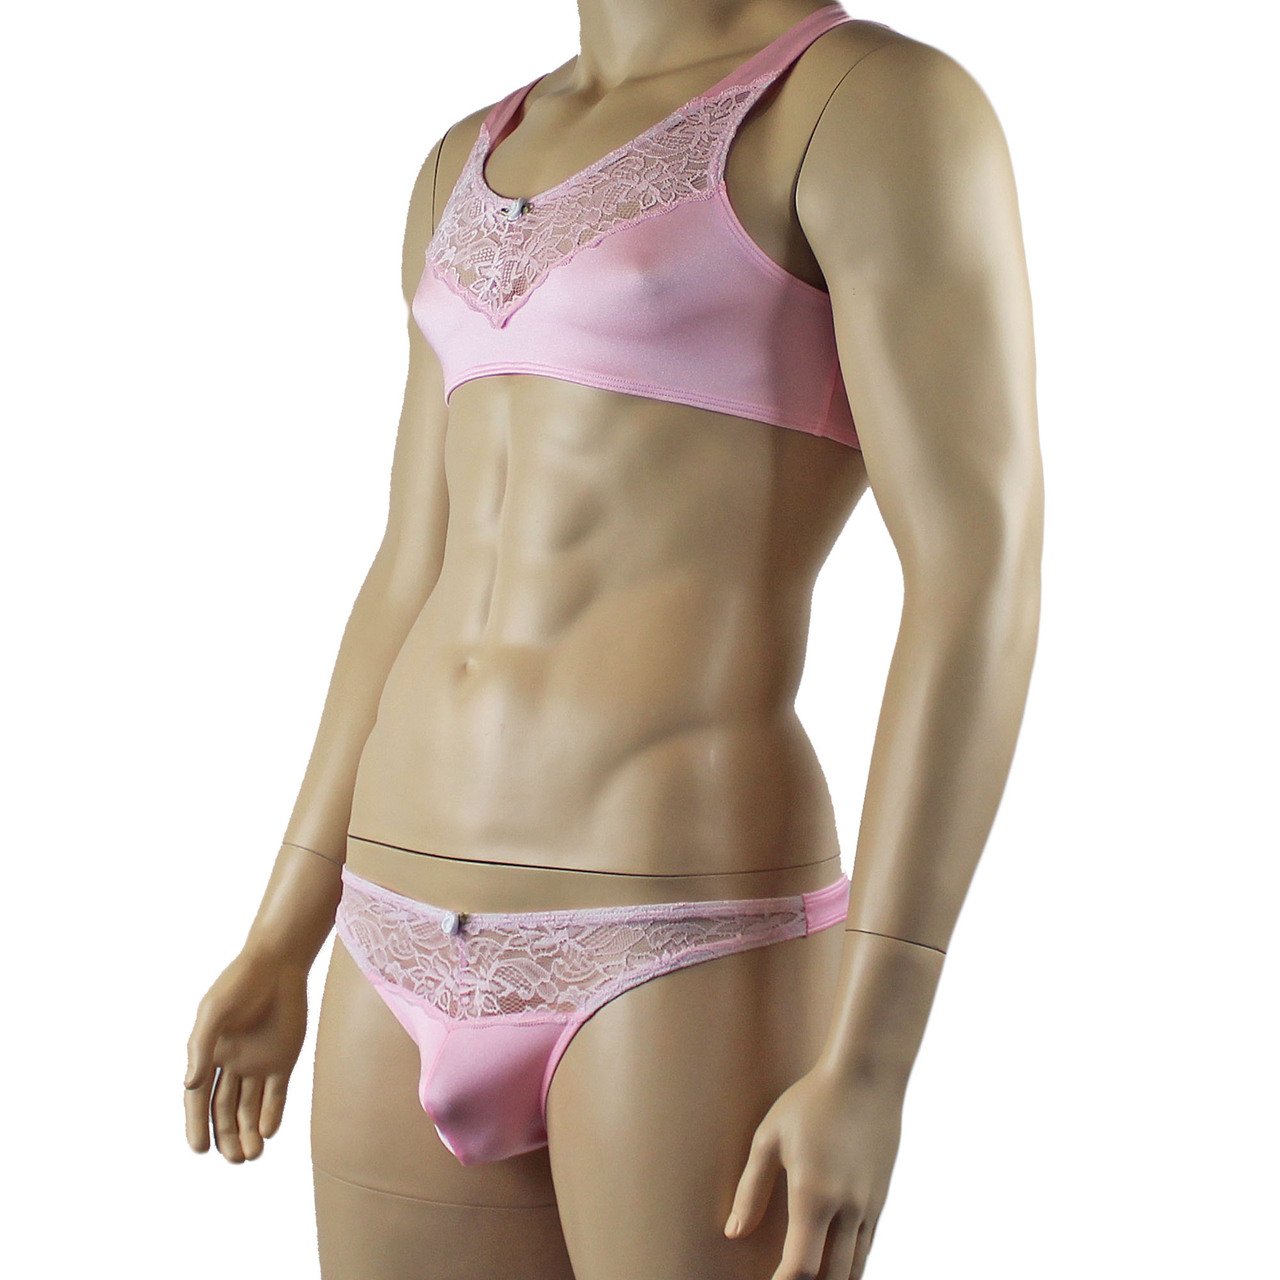 Male Penny Lingerie Bra Top with V Lace front and Capri Bikini (light pink plus other colours)